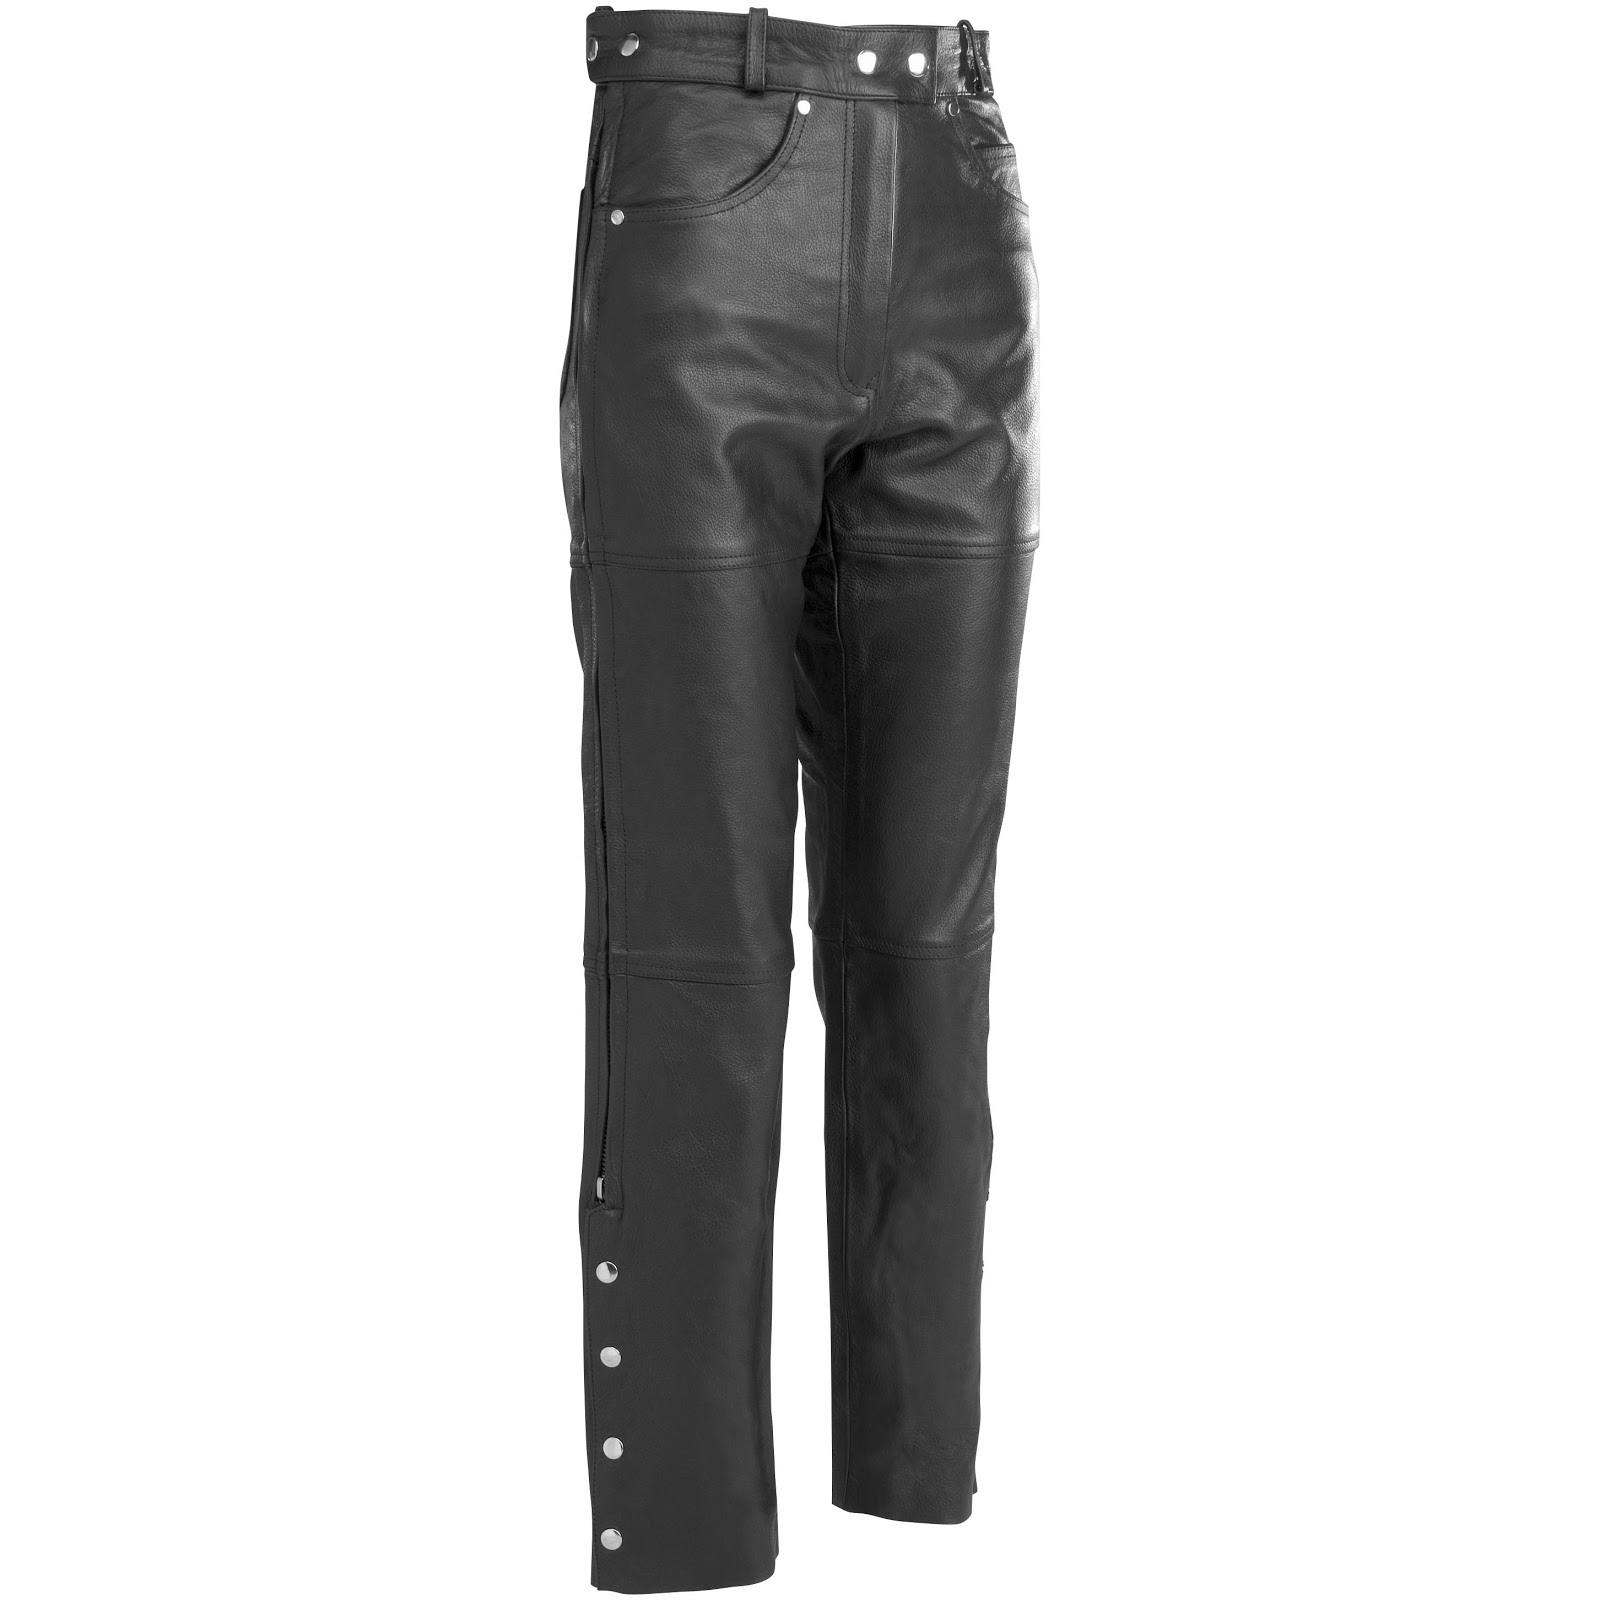 Latest Leather Pants For Women - SimplyHerStyle